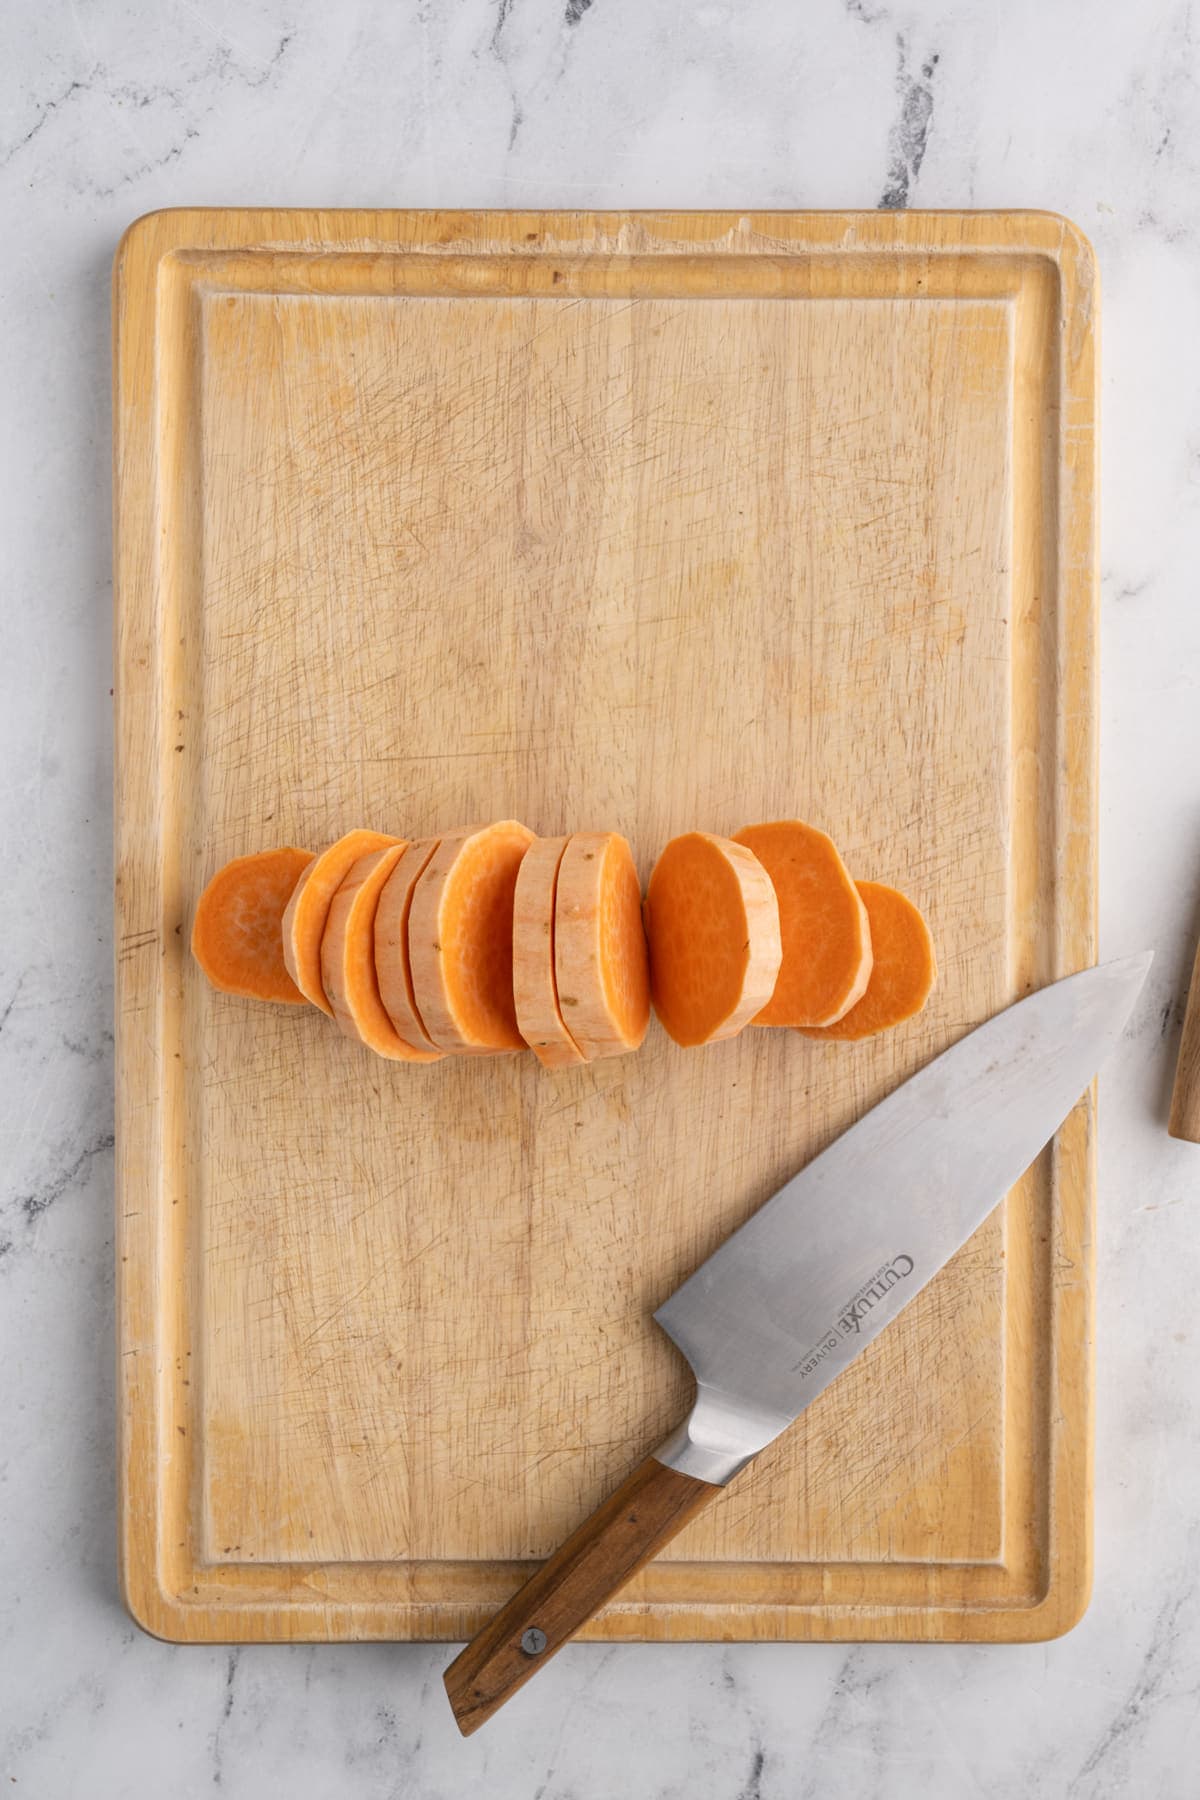 Slicing sweet potatoes into one inch thick pieces